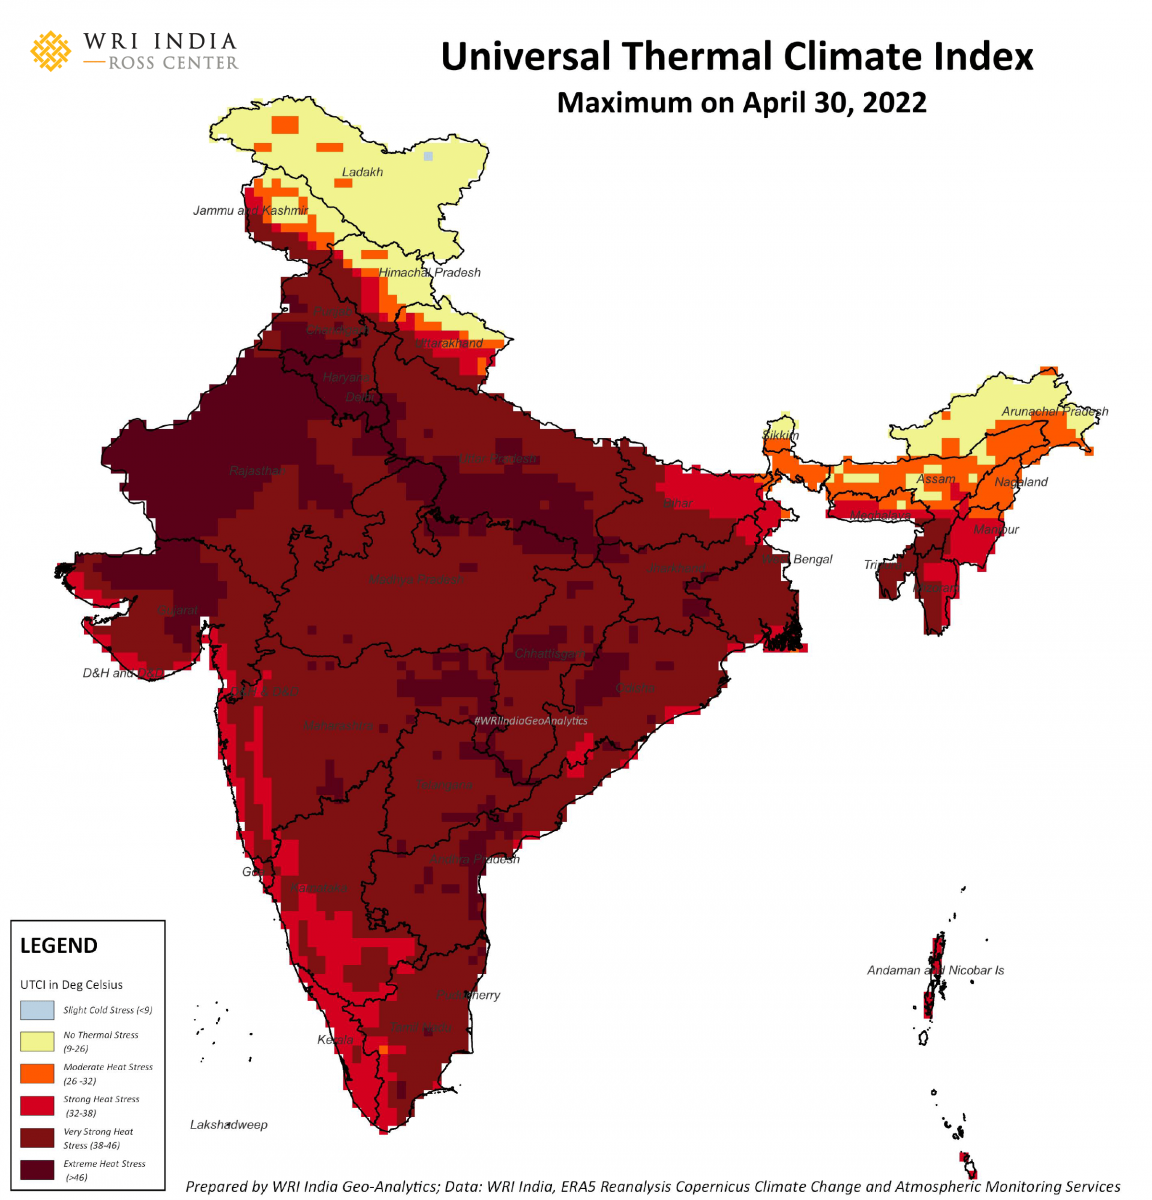 Map shows maximum recorded Universal Thermal Climate Index for 30 April